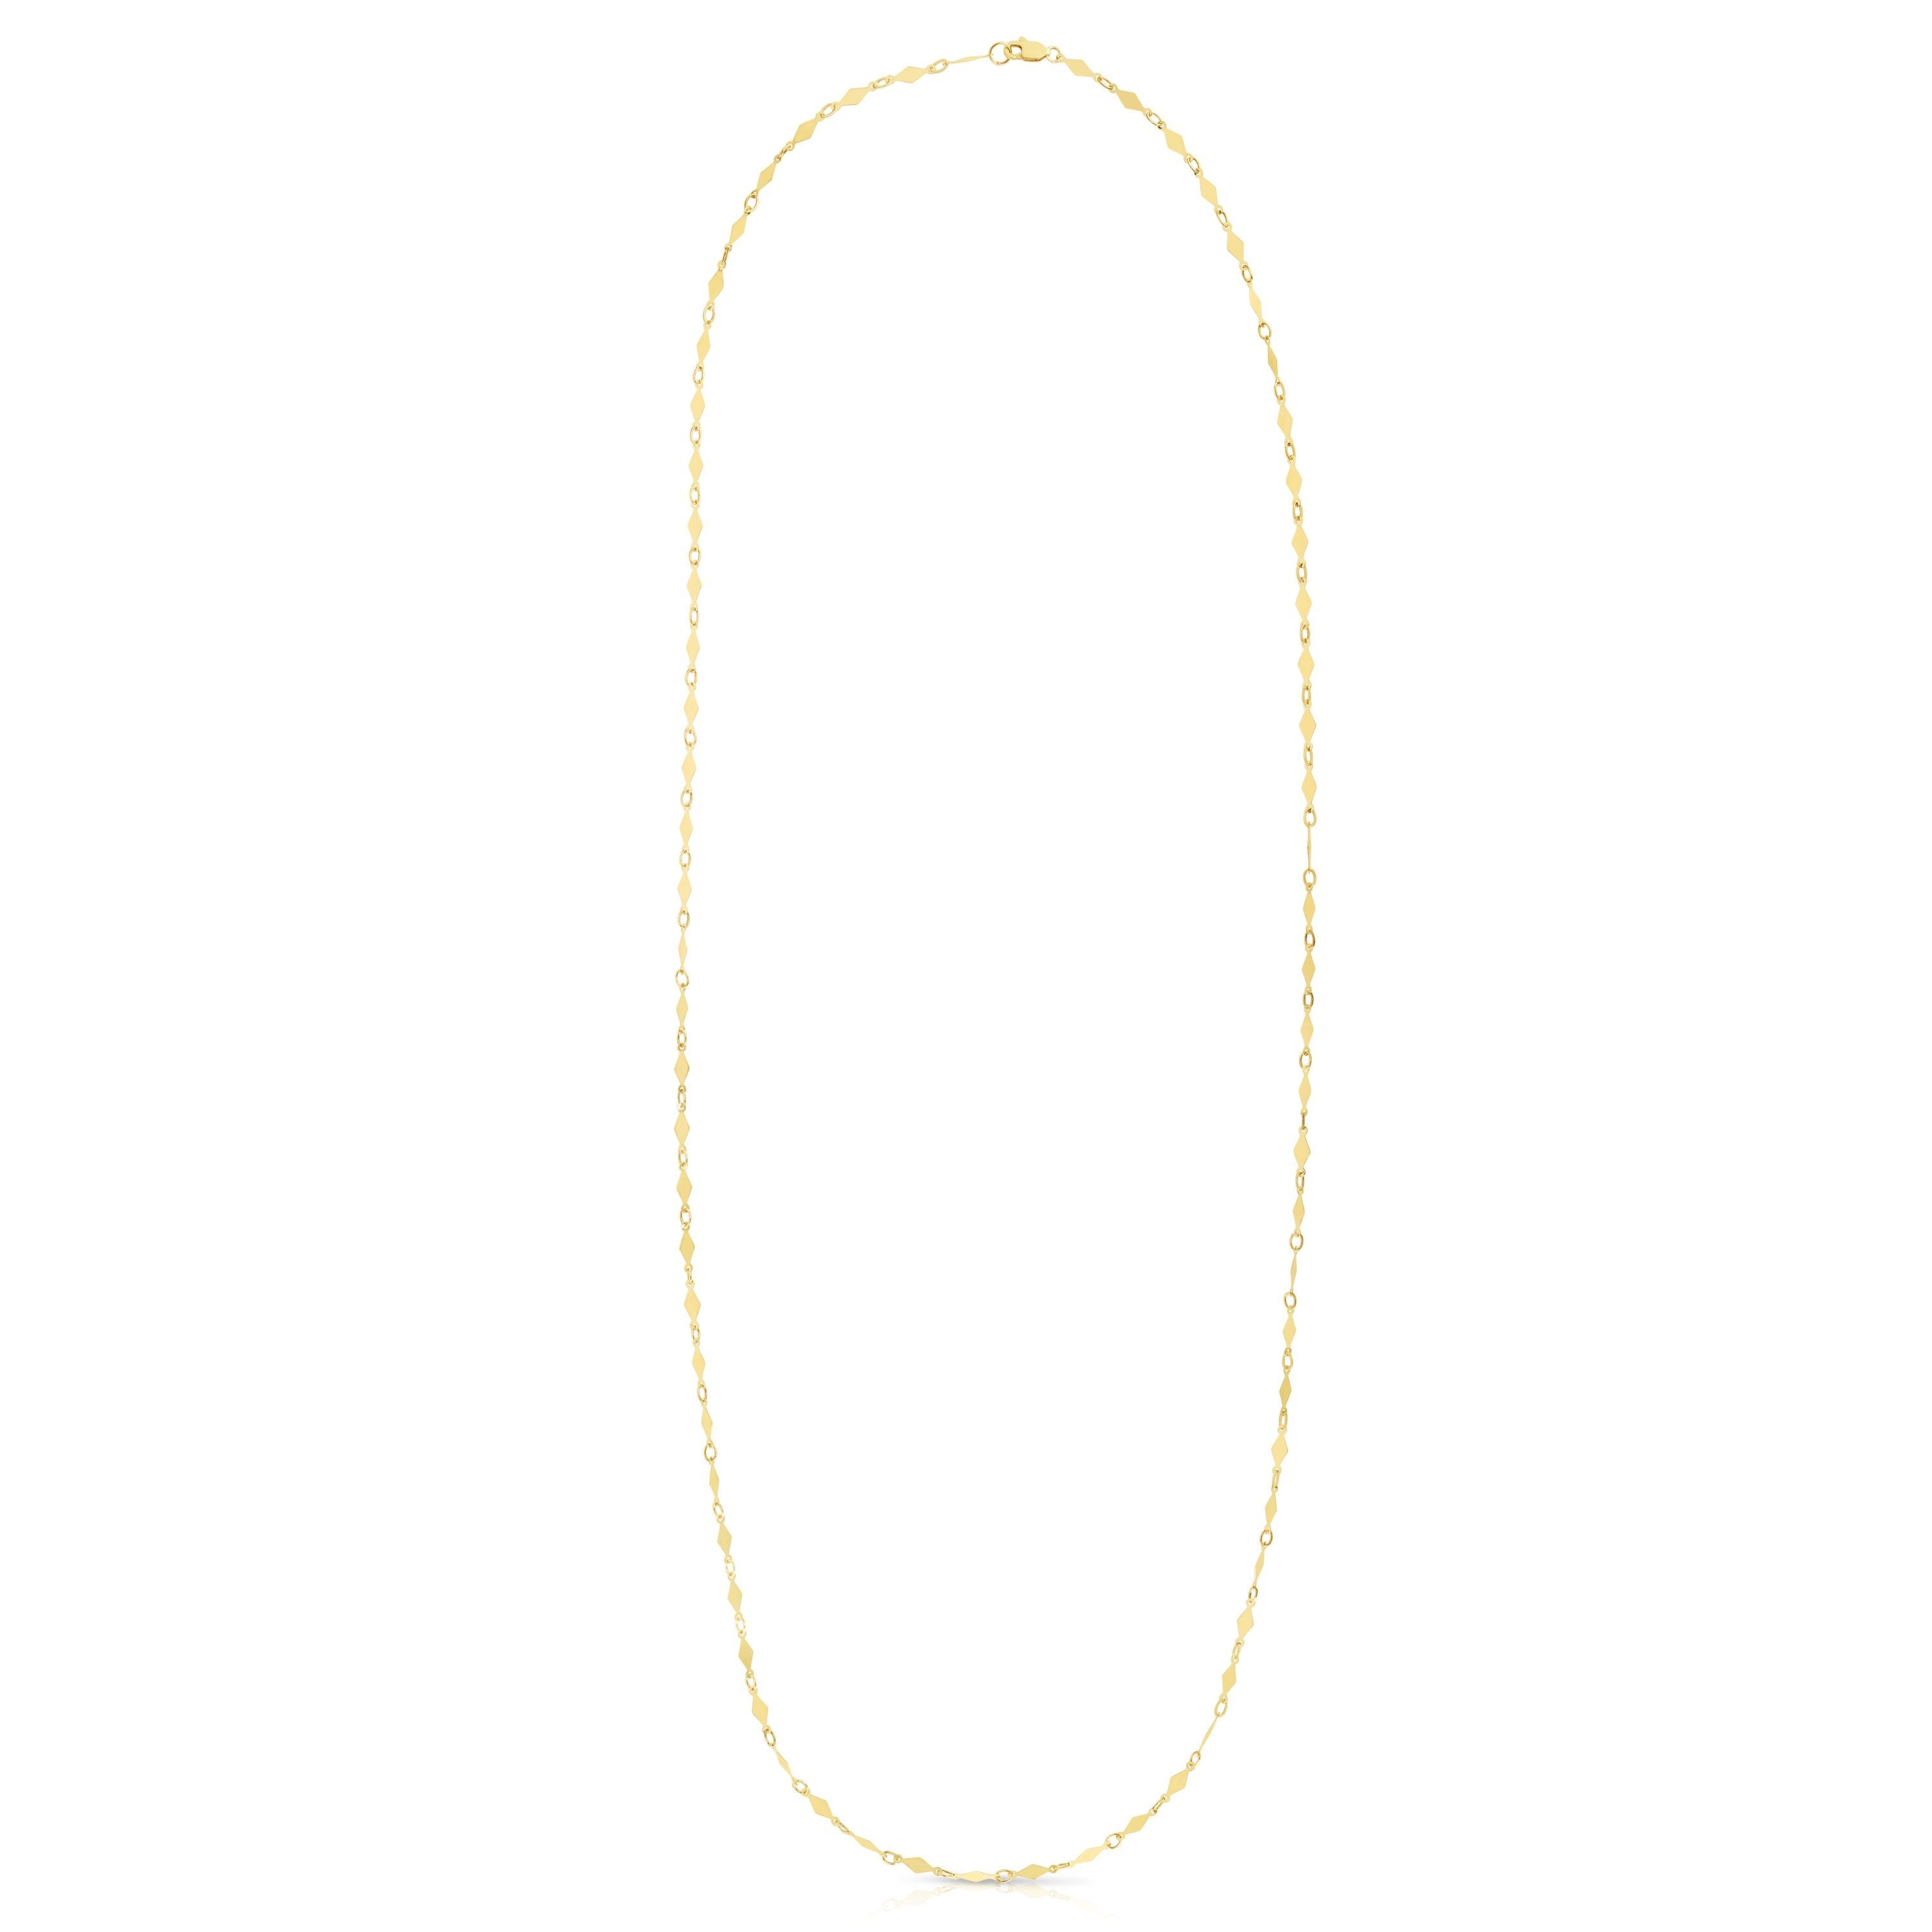 Polished Diamond Shaped Necklace with Lobster Clasp